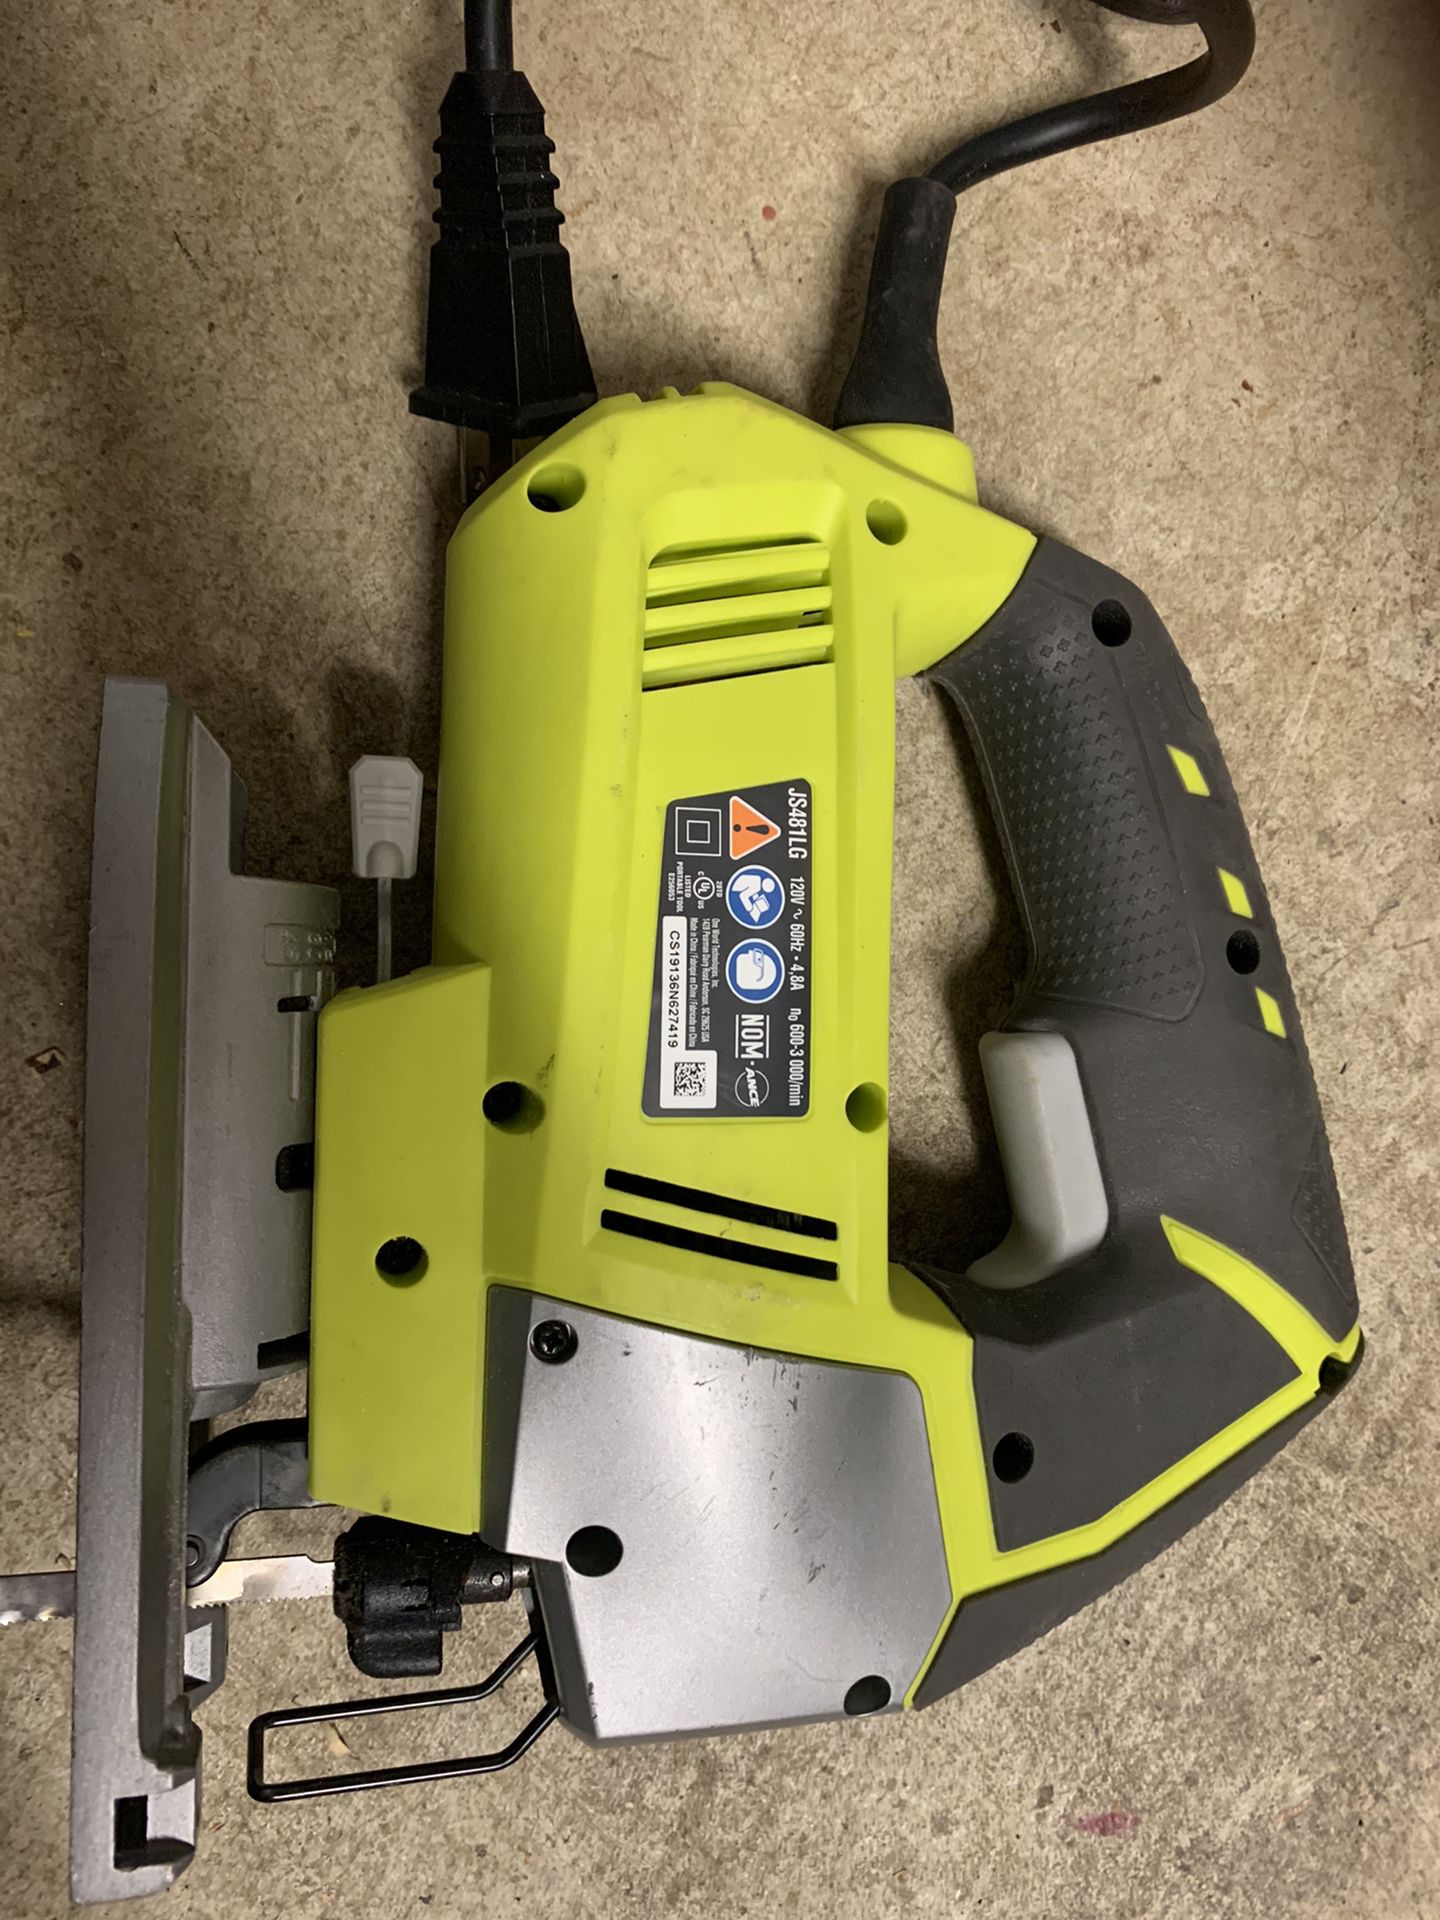 Ryobi Jigsaw electric 4.8 Amp corded variable 3 speed. EXCELLENT condition. NEW price